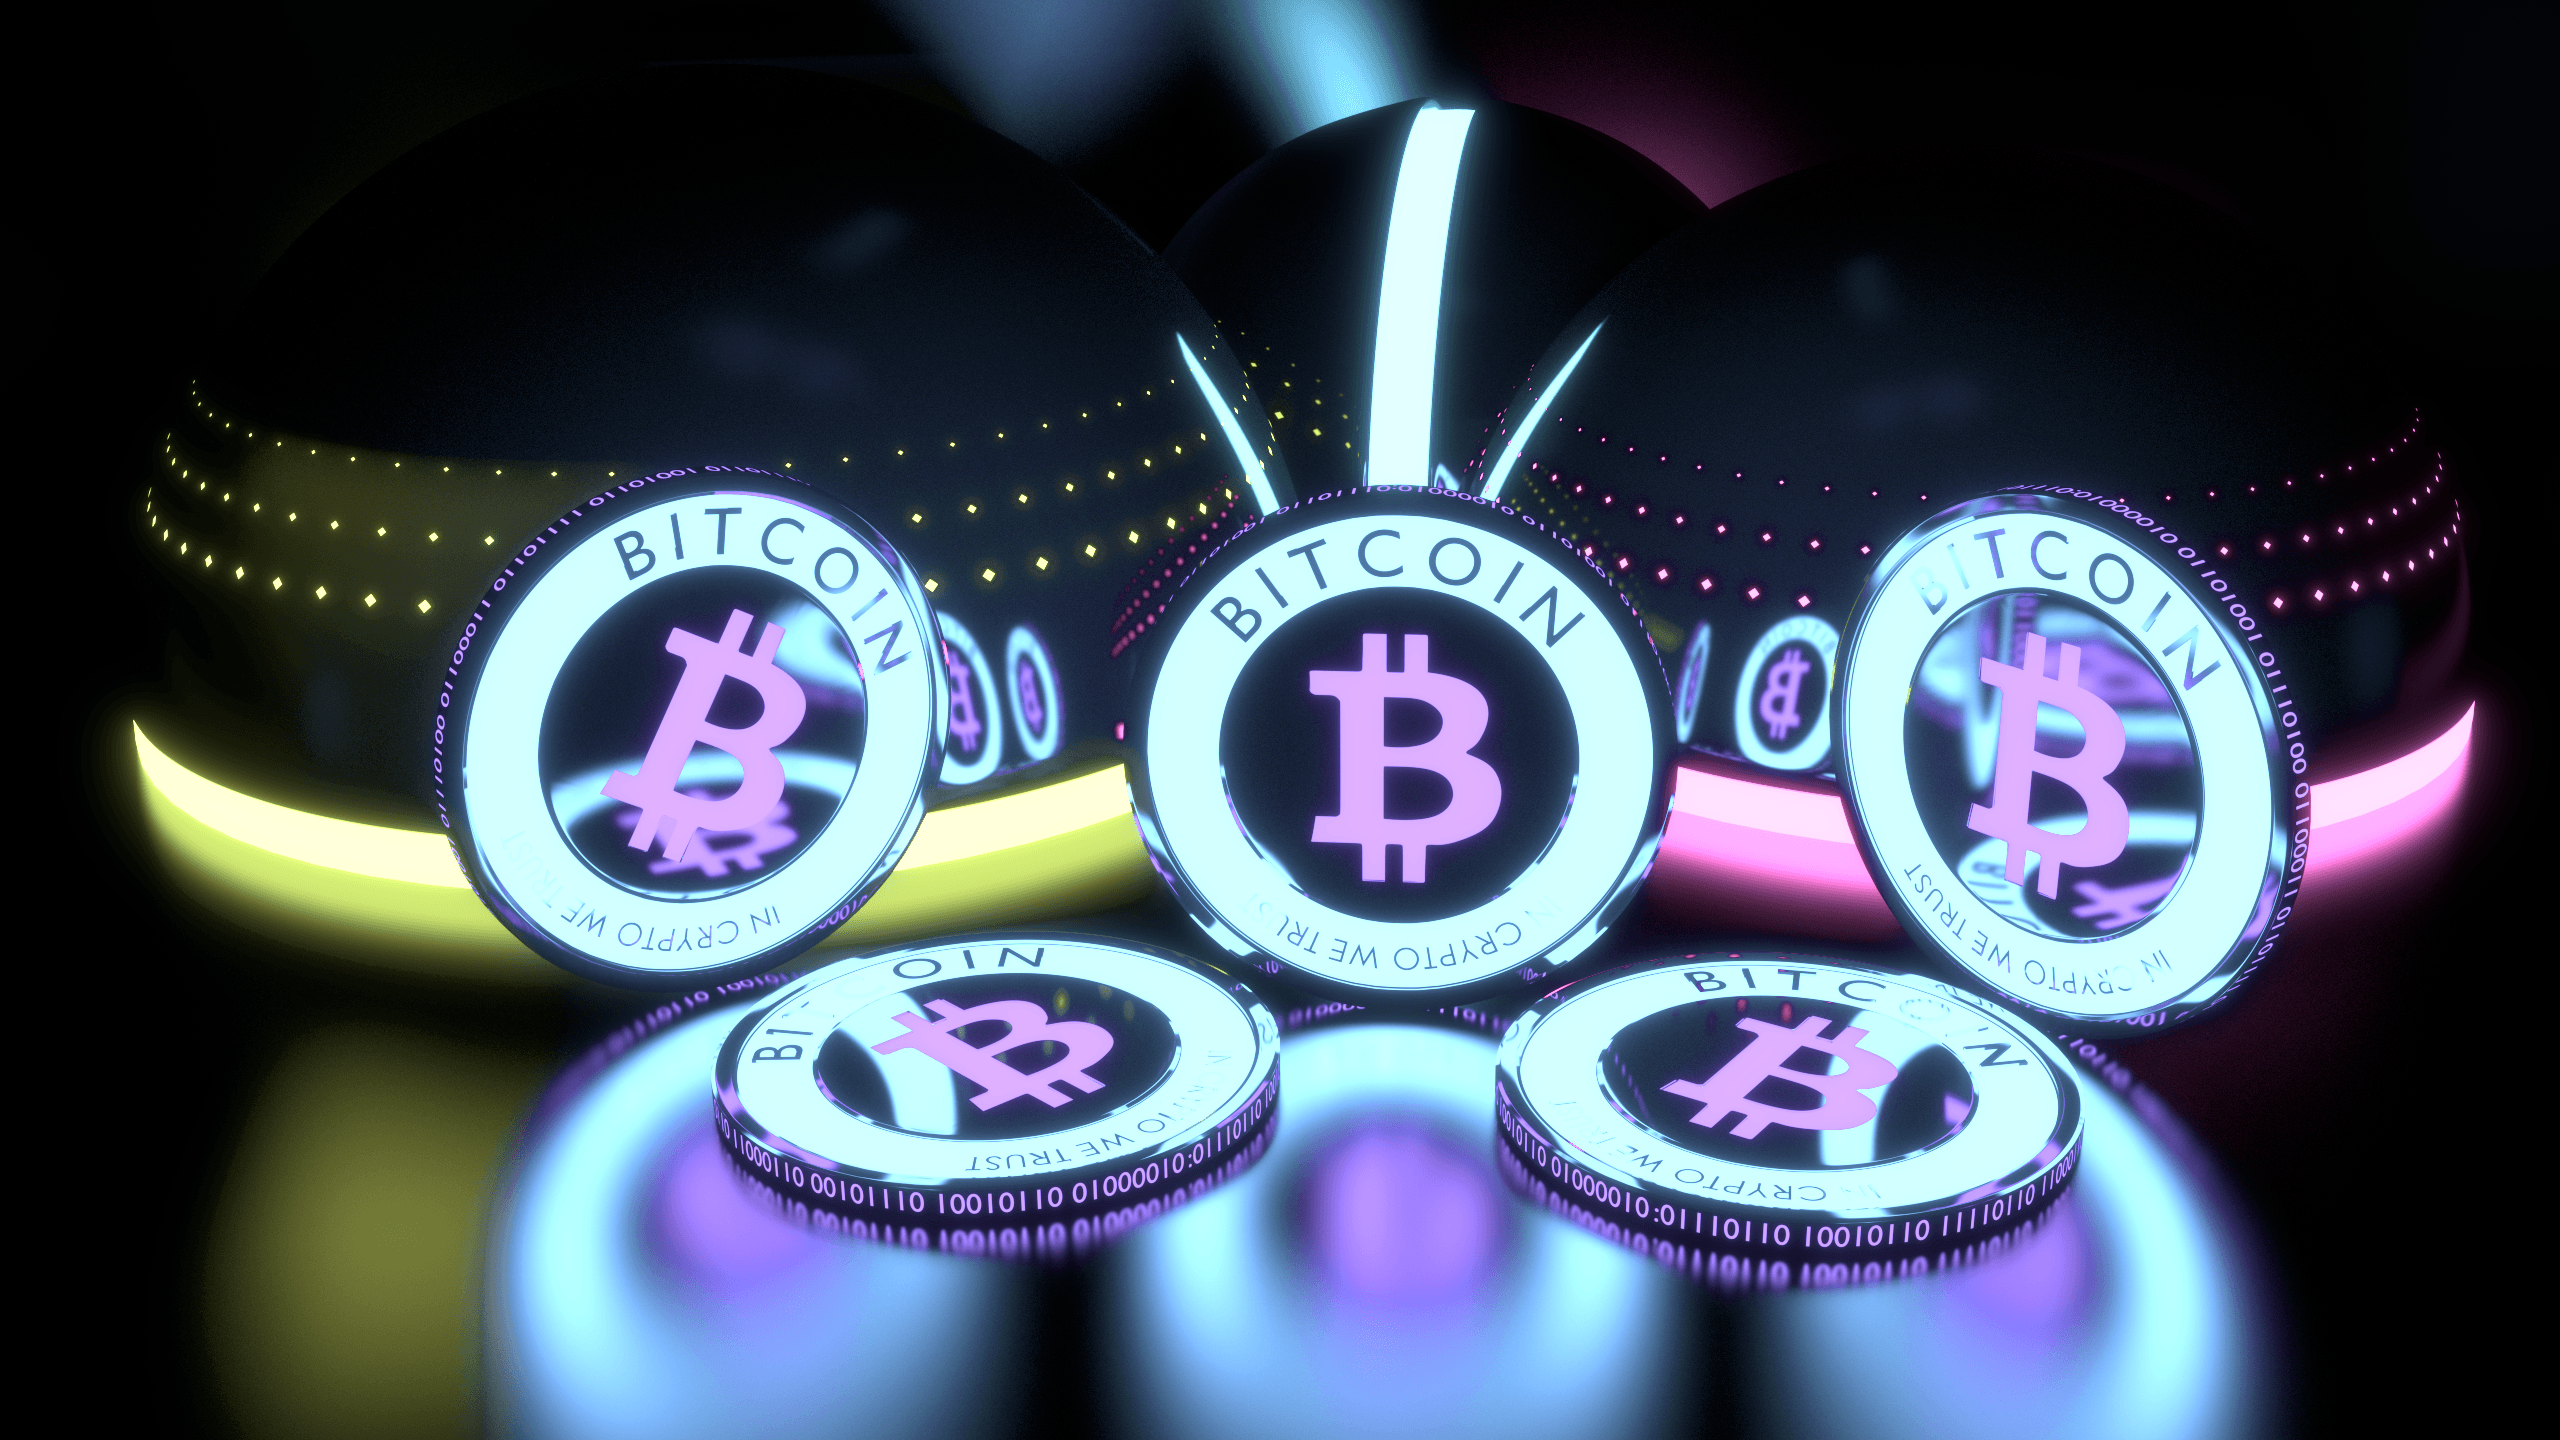 Some Bitcoin wallpaper I rendered, free for any use higher